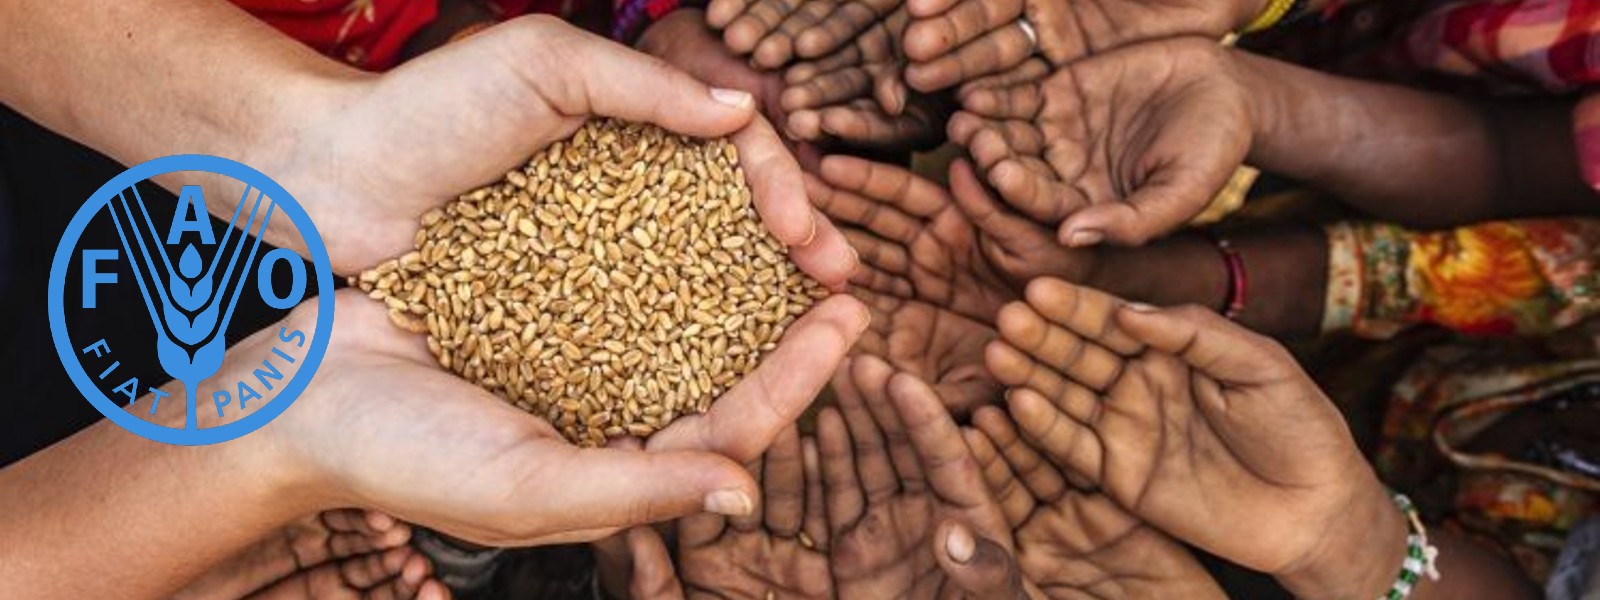 Sri Lanka will experience further deterioration of food security – UN FAO Report